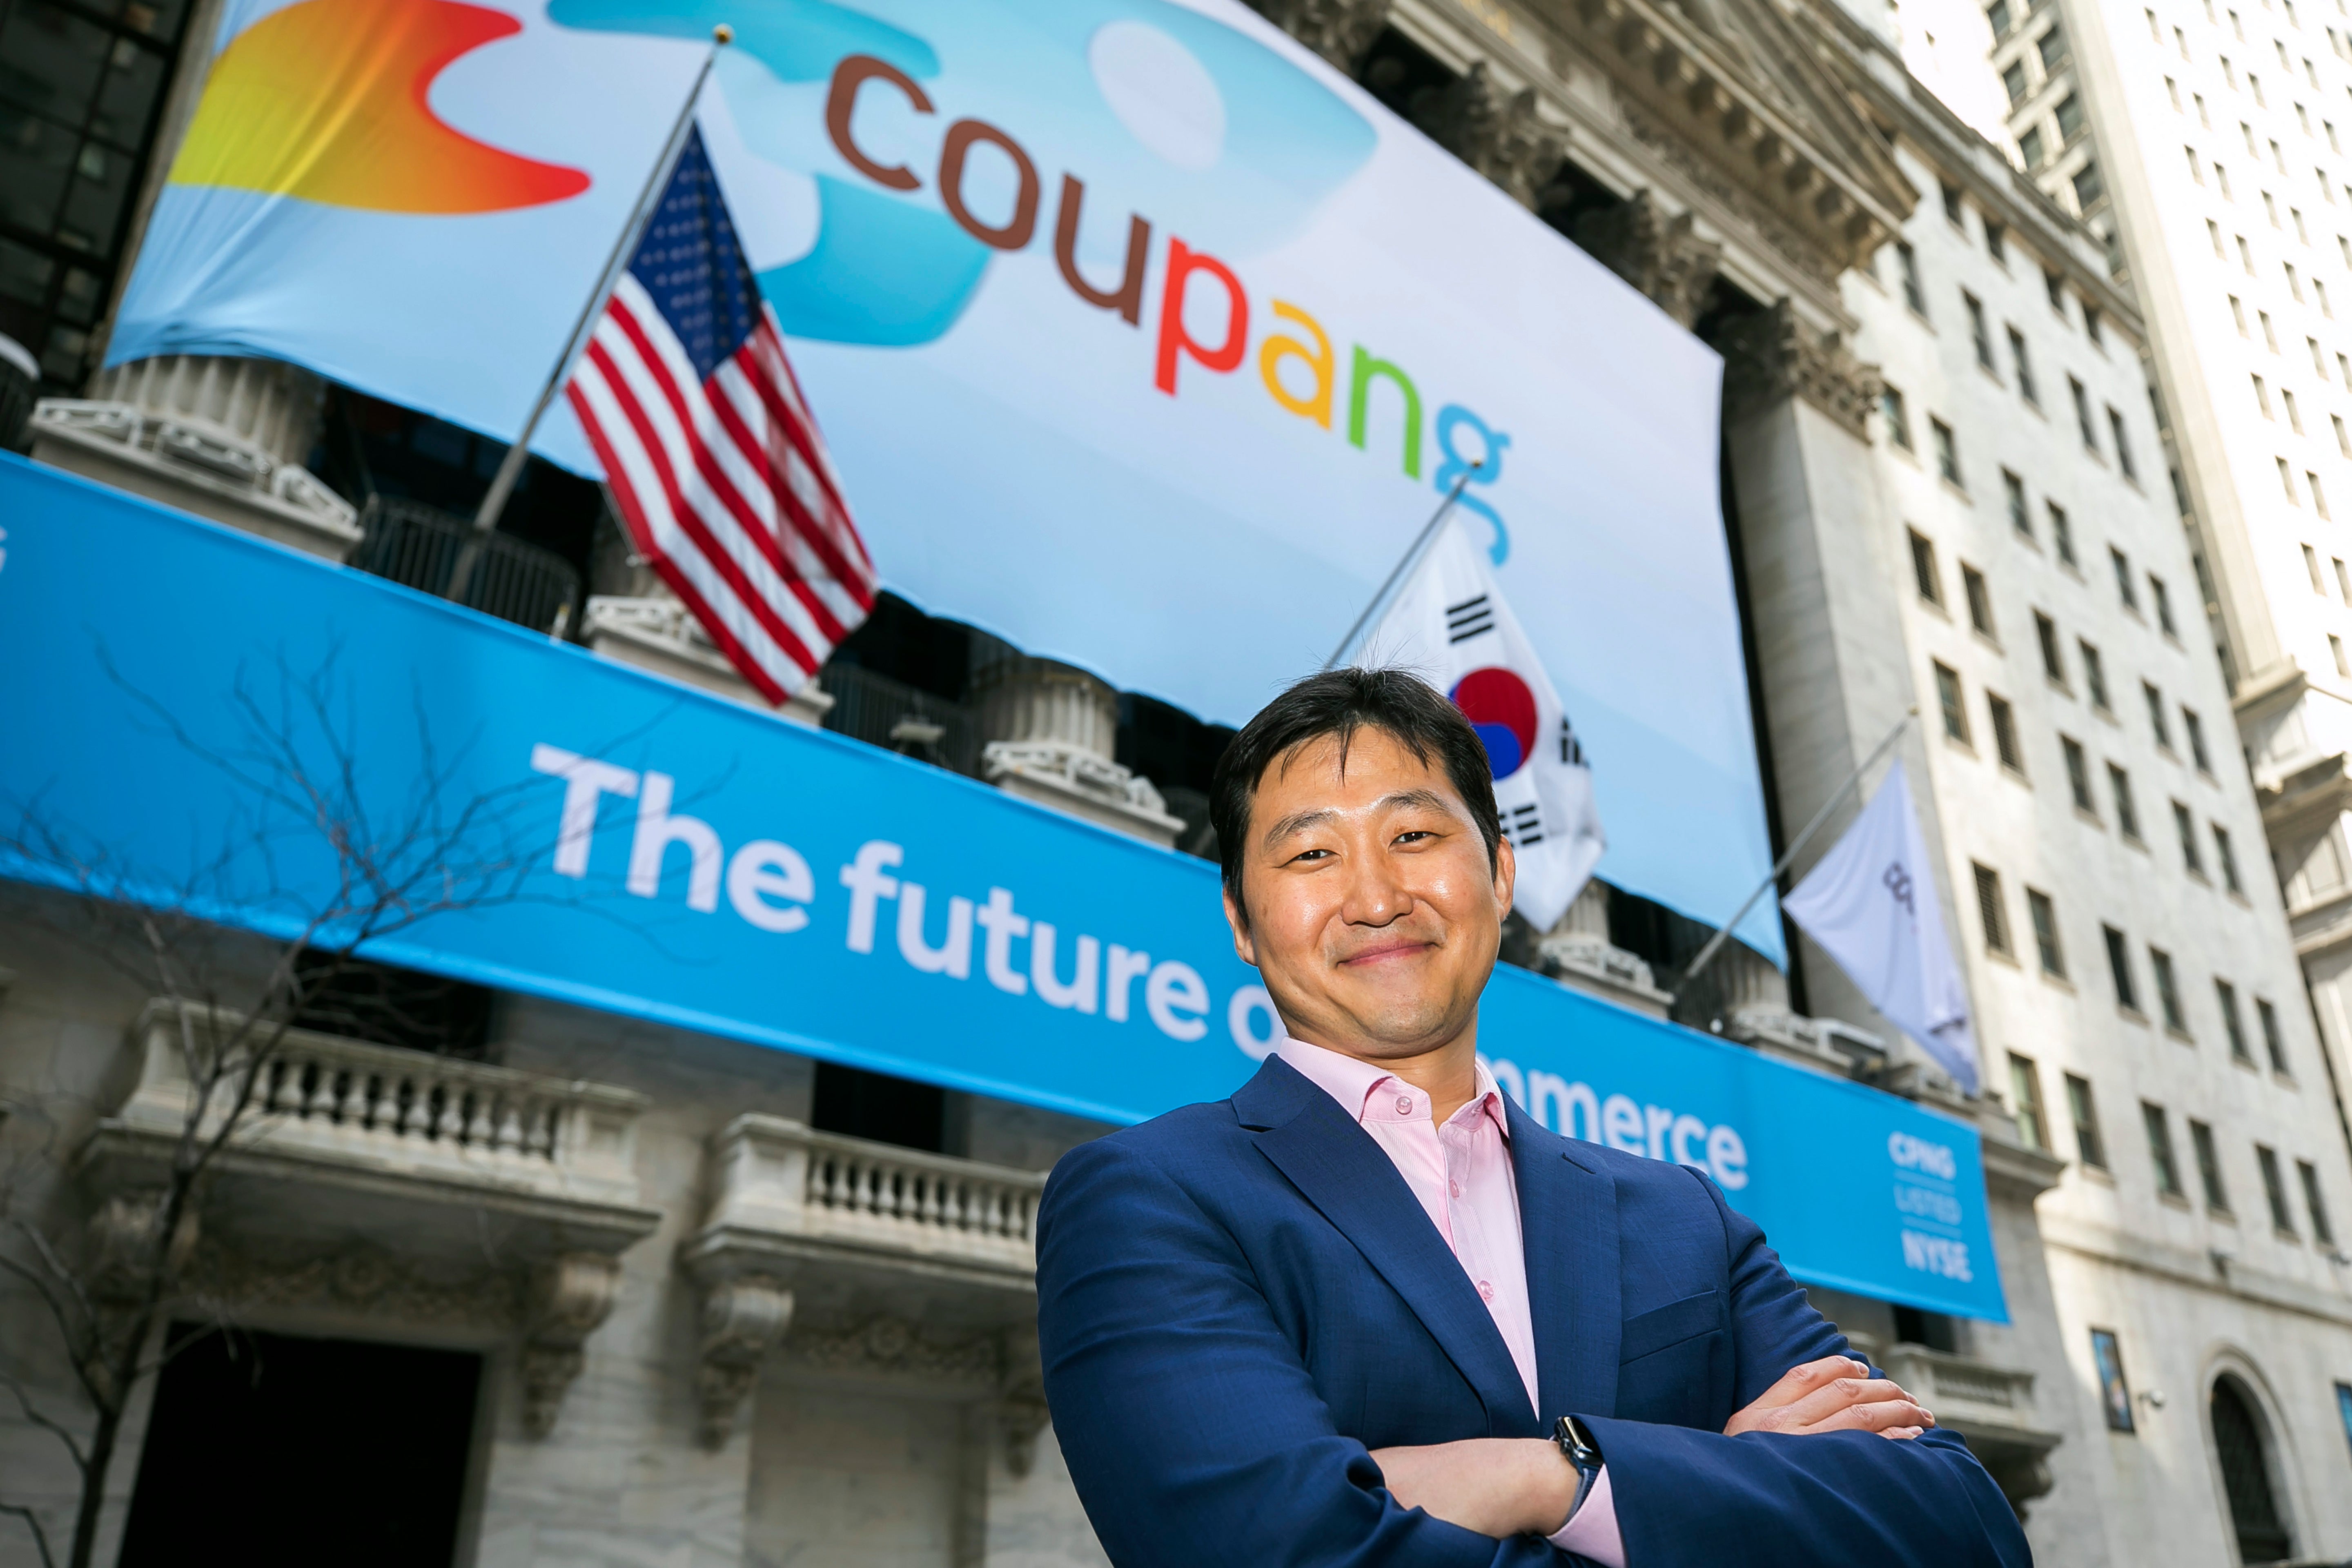 Coupang Founder and CEO Bom Kim poses in front of the New York Stock Exchange facade ahead of his company’s IPO